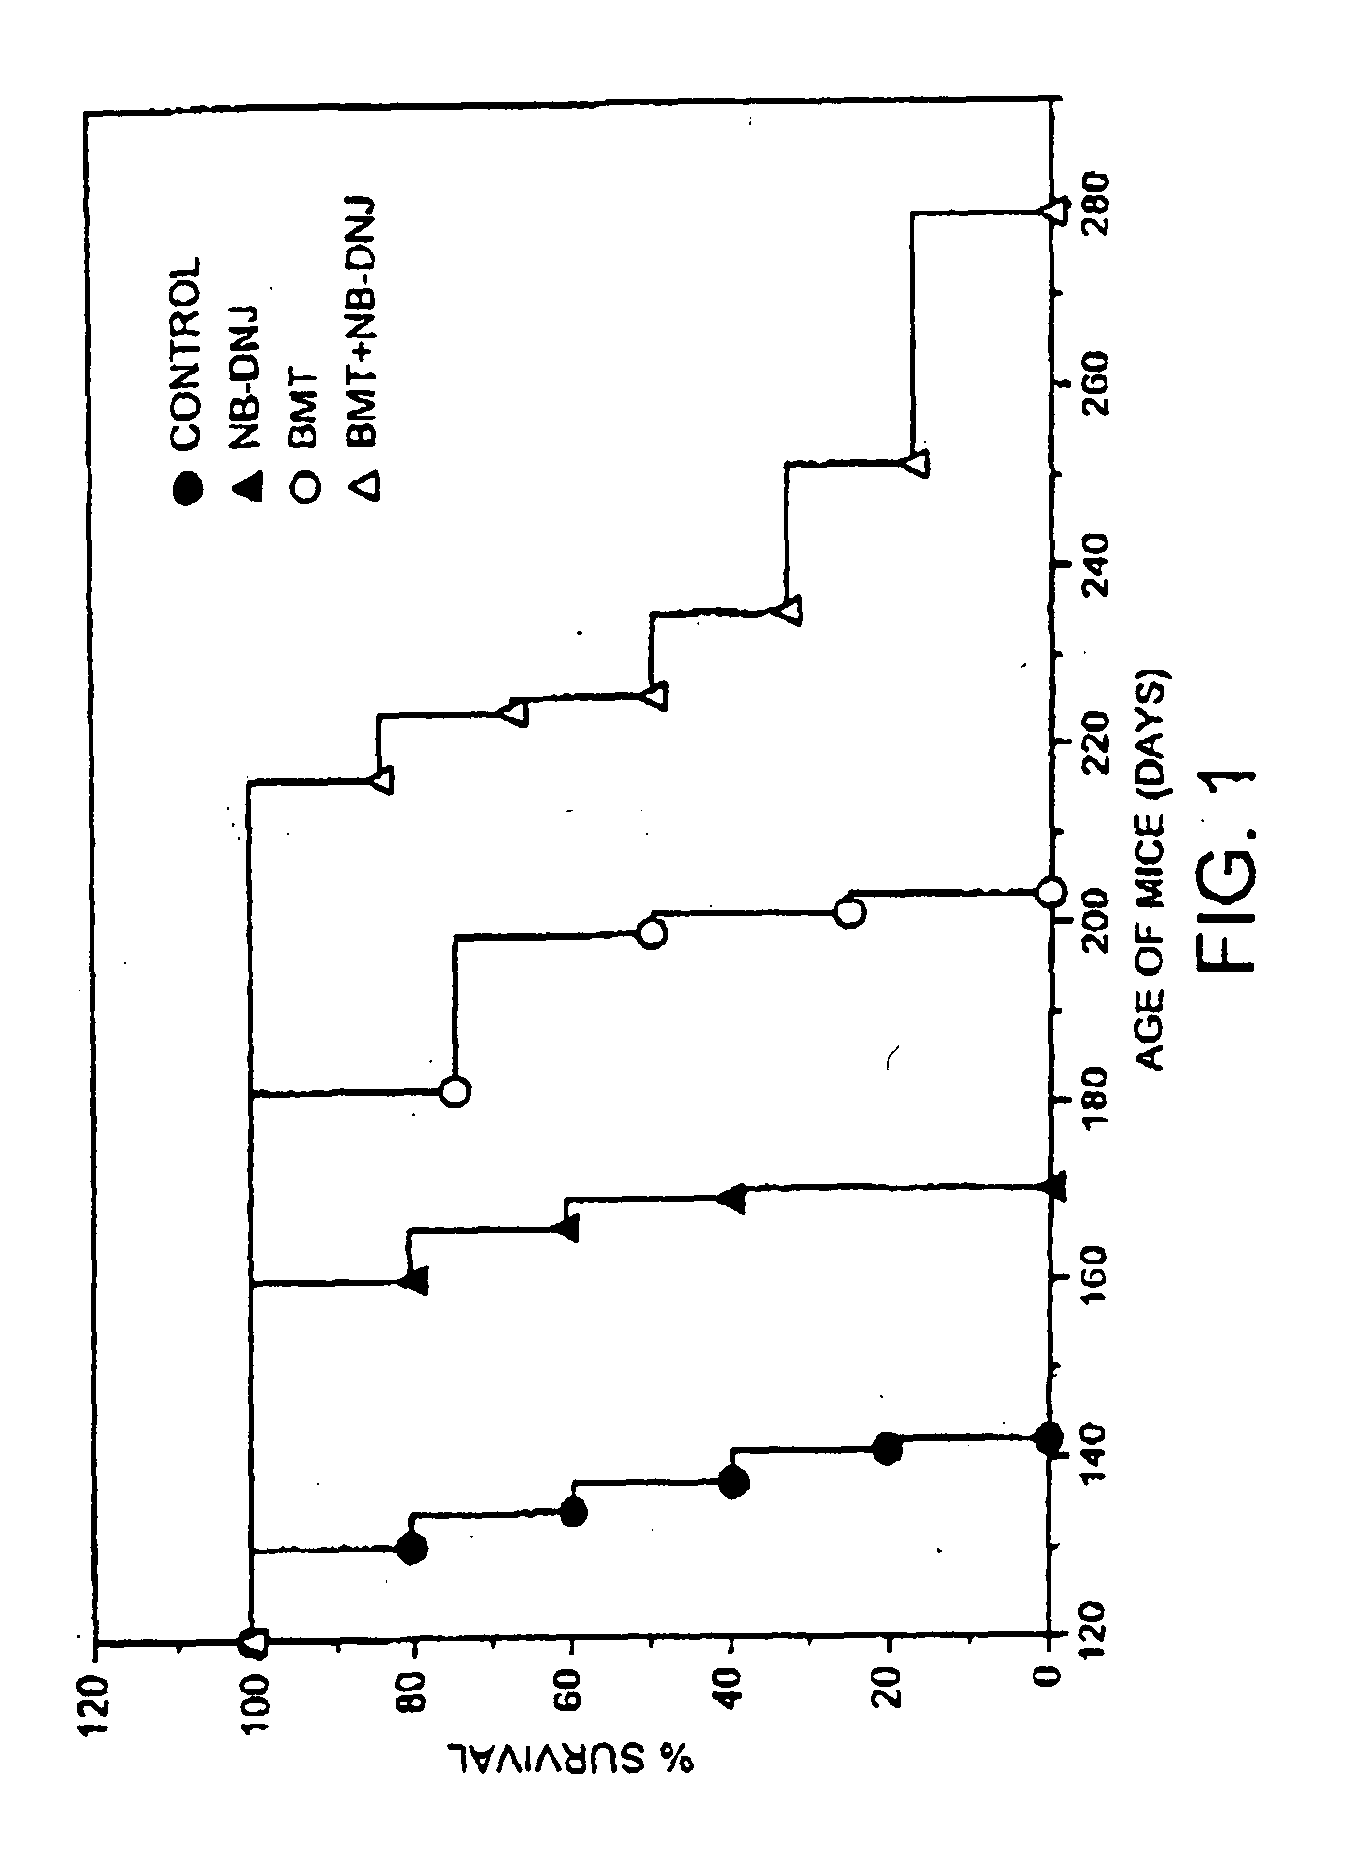 Therapeutic compositions and methods of treating glycolipid storage related disorders